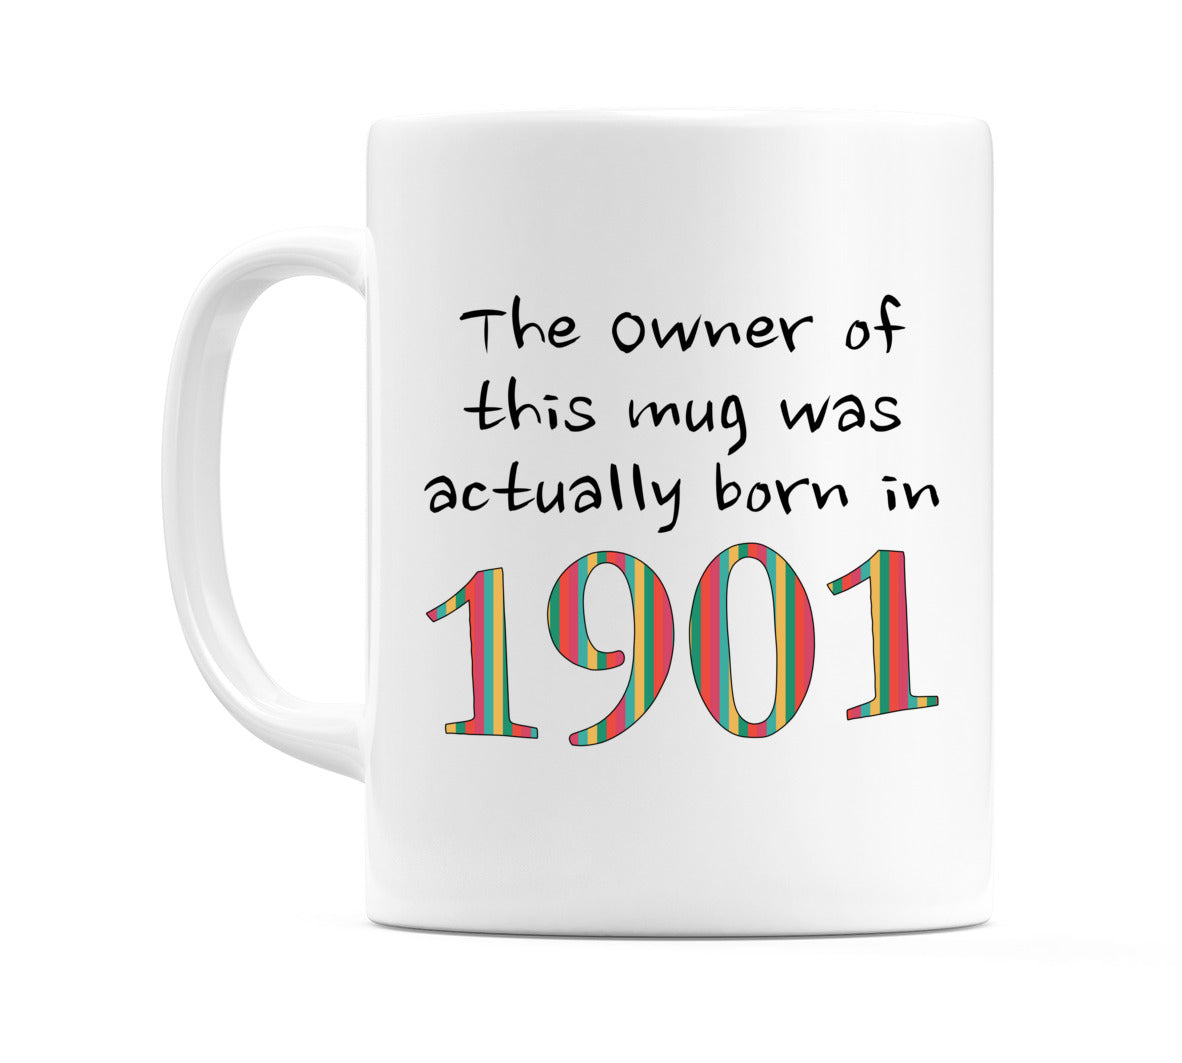 The owner of this mug was actually born In 1901 Mug